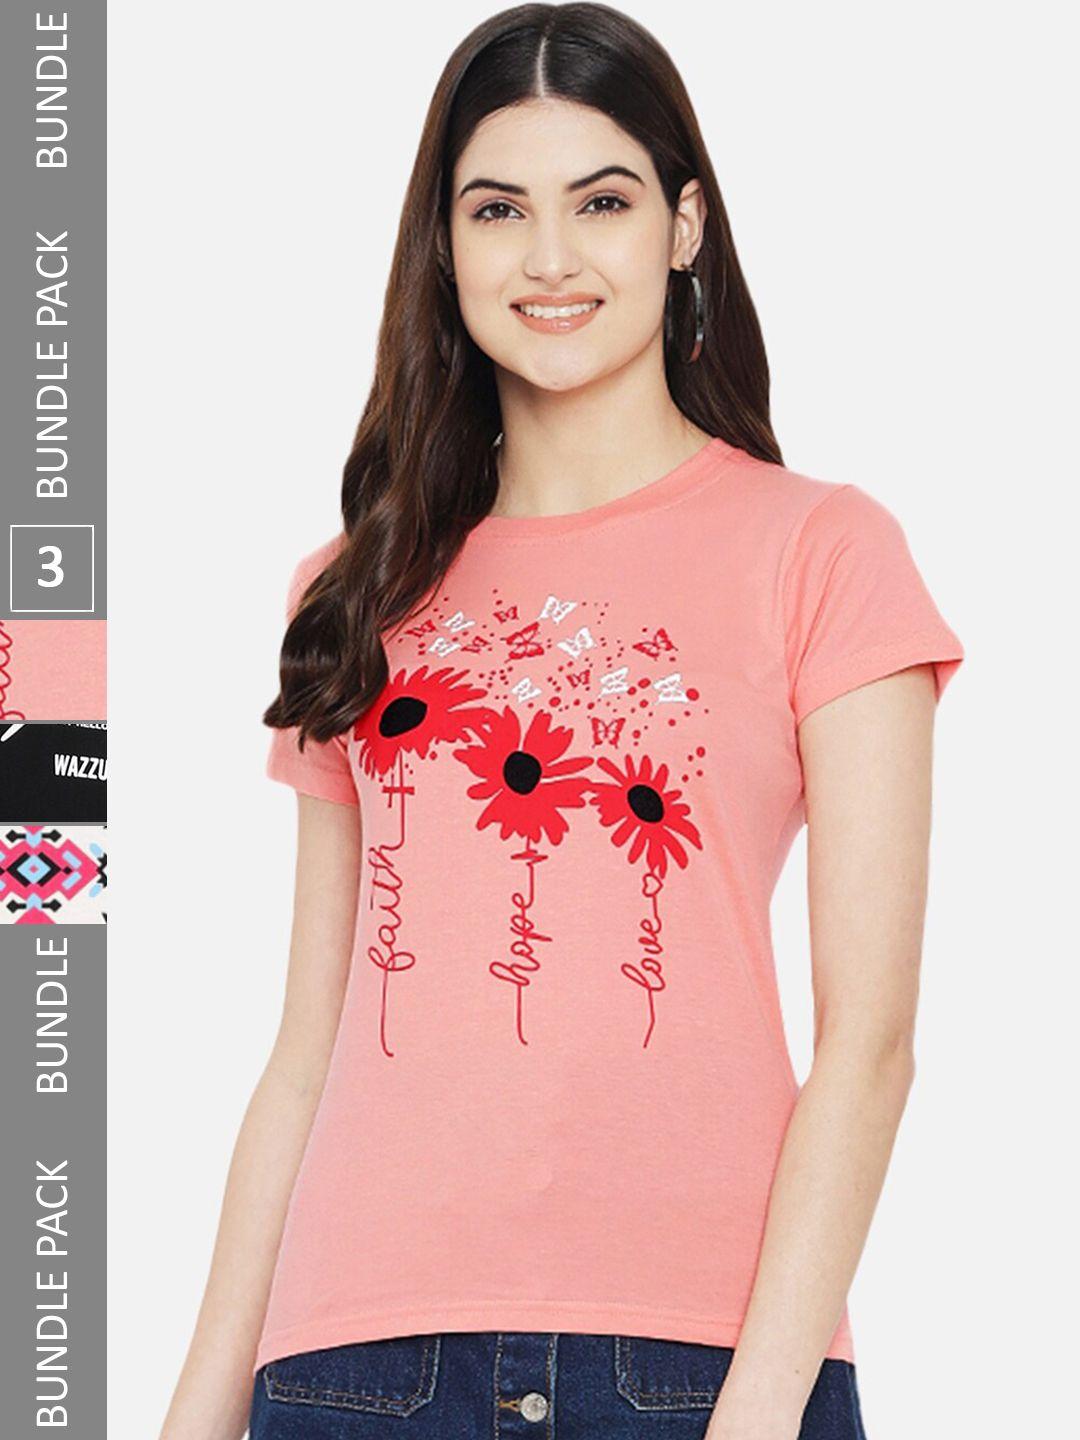 fabflee women multicoloured floral 3 printed t-shirt